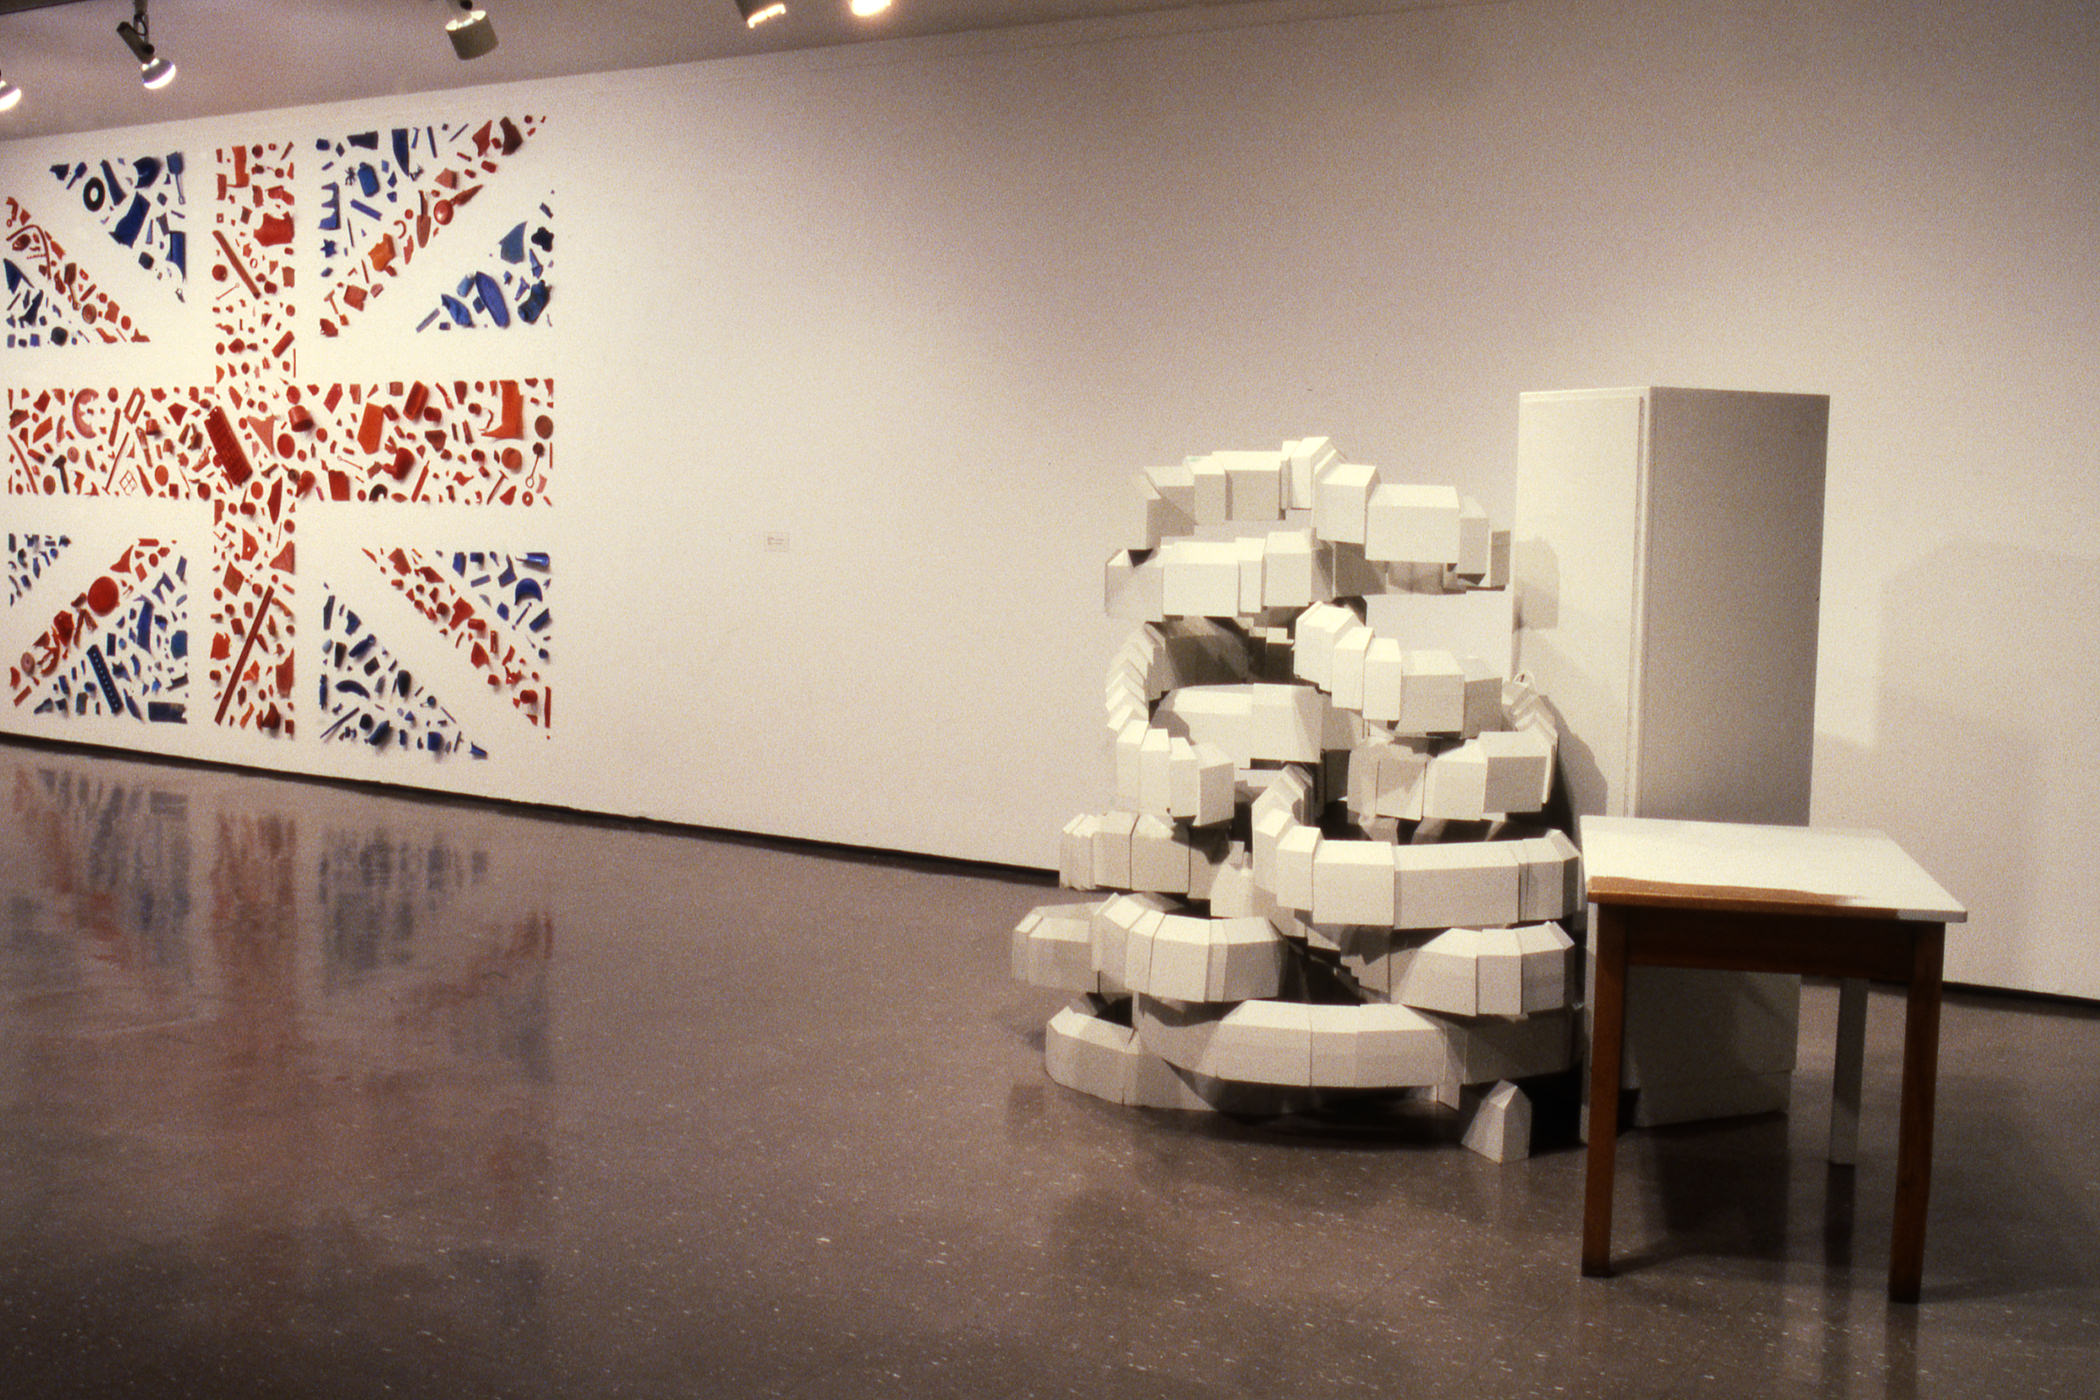  1987–88, showing, left to right: Tony Cragg, <i>Postcard Flag (Union Jack)</i>, 1981, and <i>Città</i>, 1986. Collection Museum of Contemporary Art Chicago Library and Archives